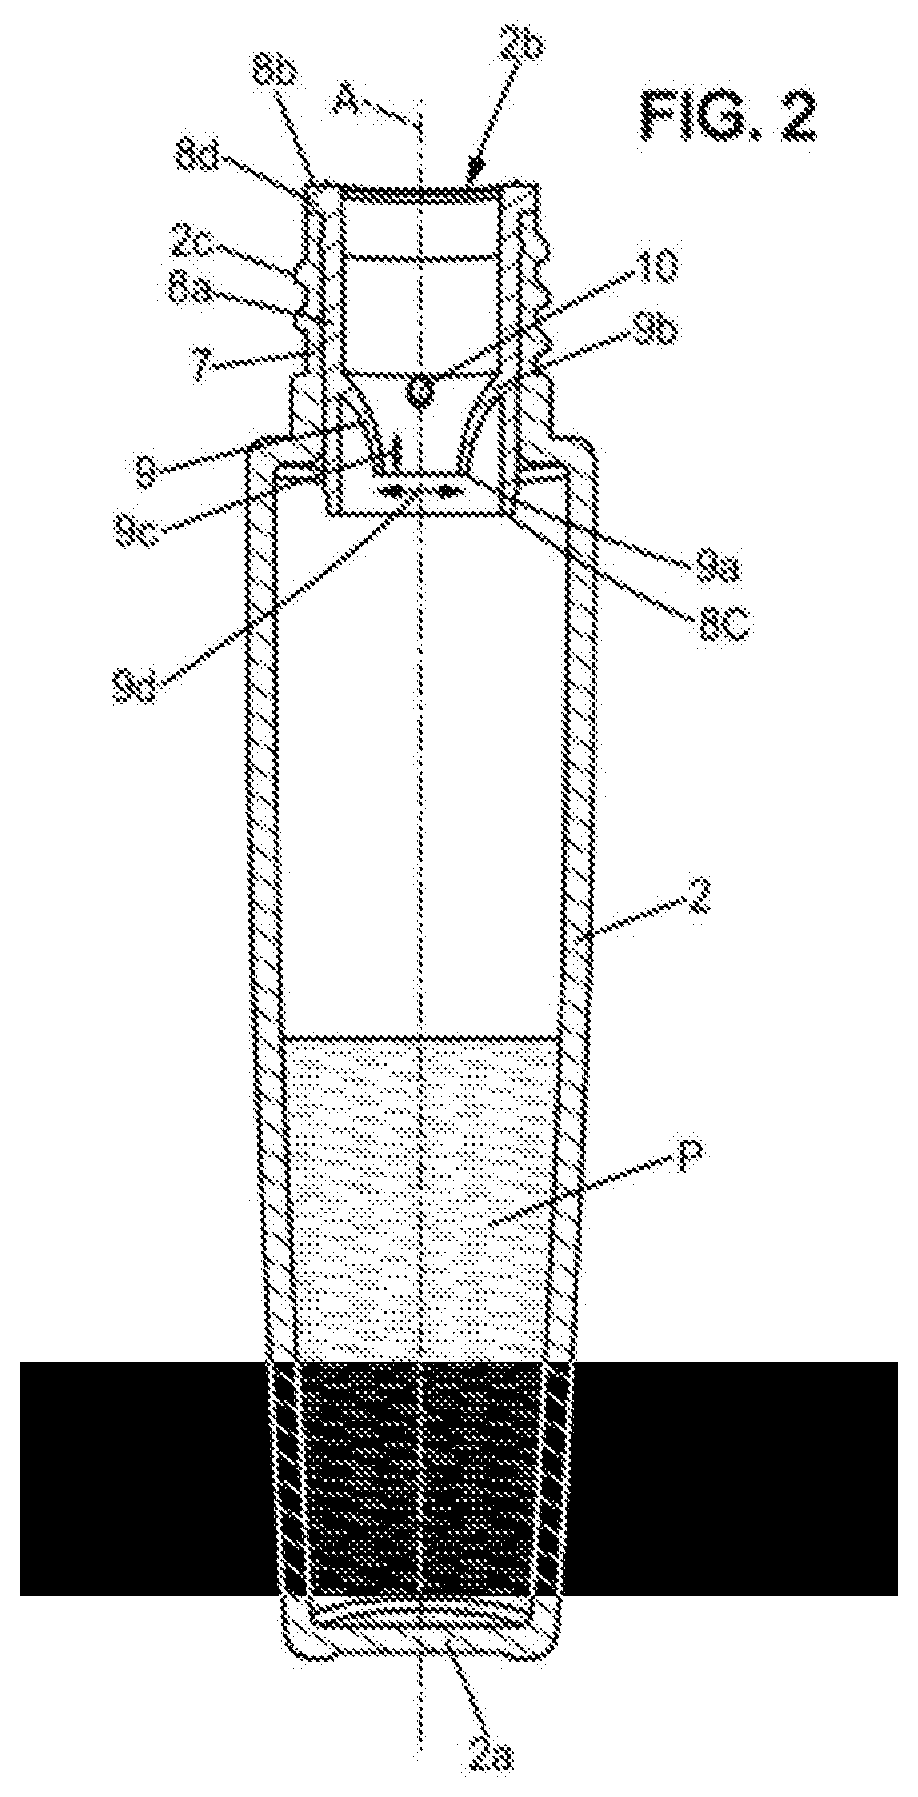 Wiper member for a device for the packaging and application of a cosmetic product